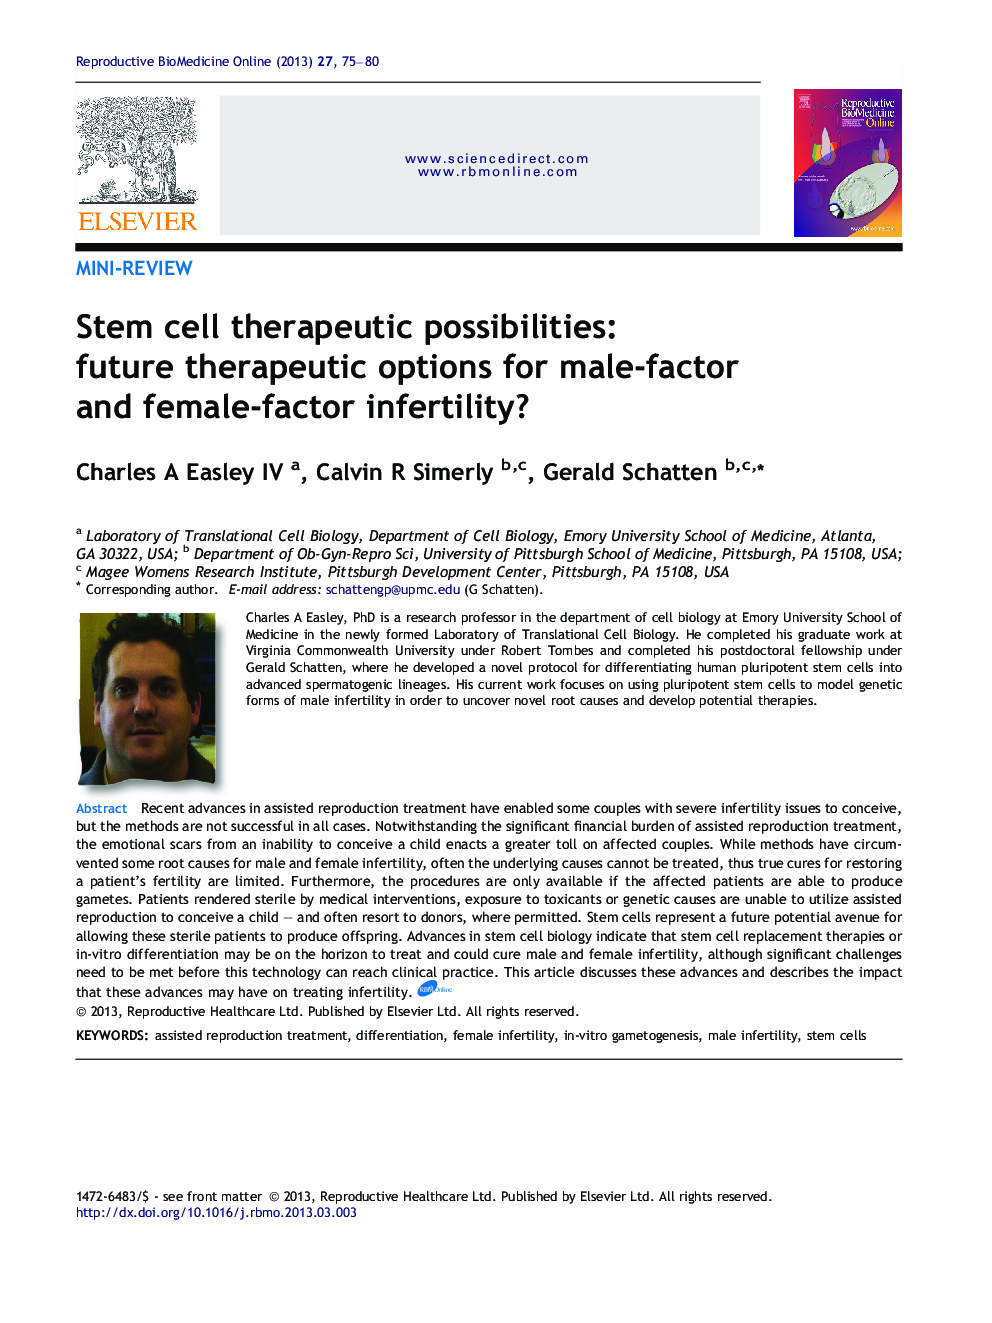 Stem cell therapeutic possibilities: future therapeutic options for male-factor and female-factor infertility? 